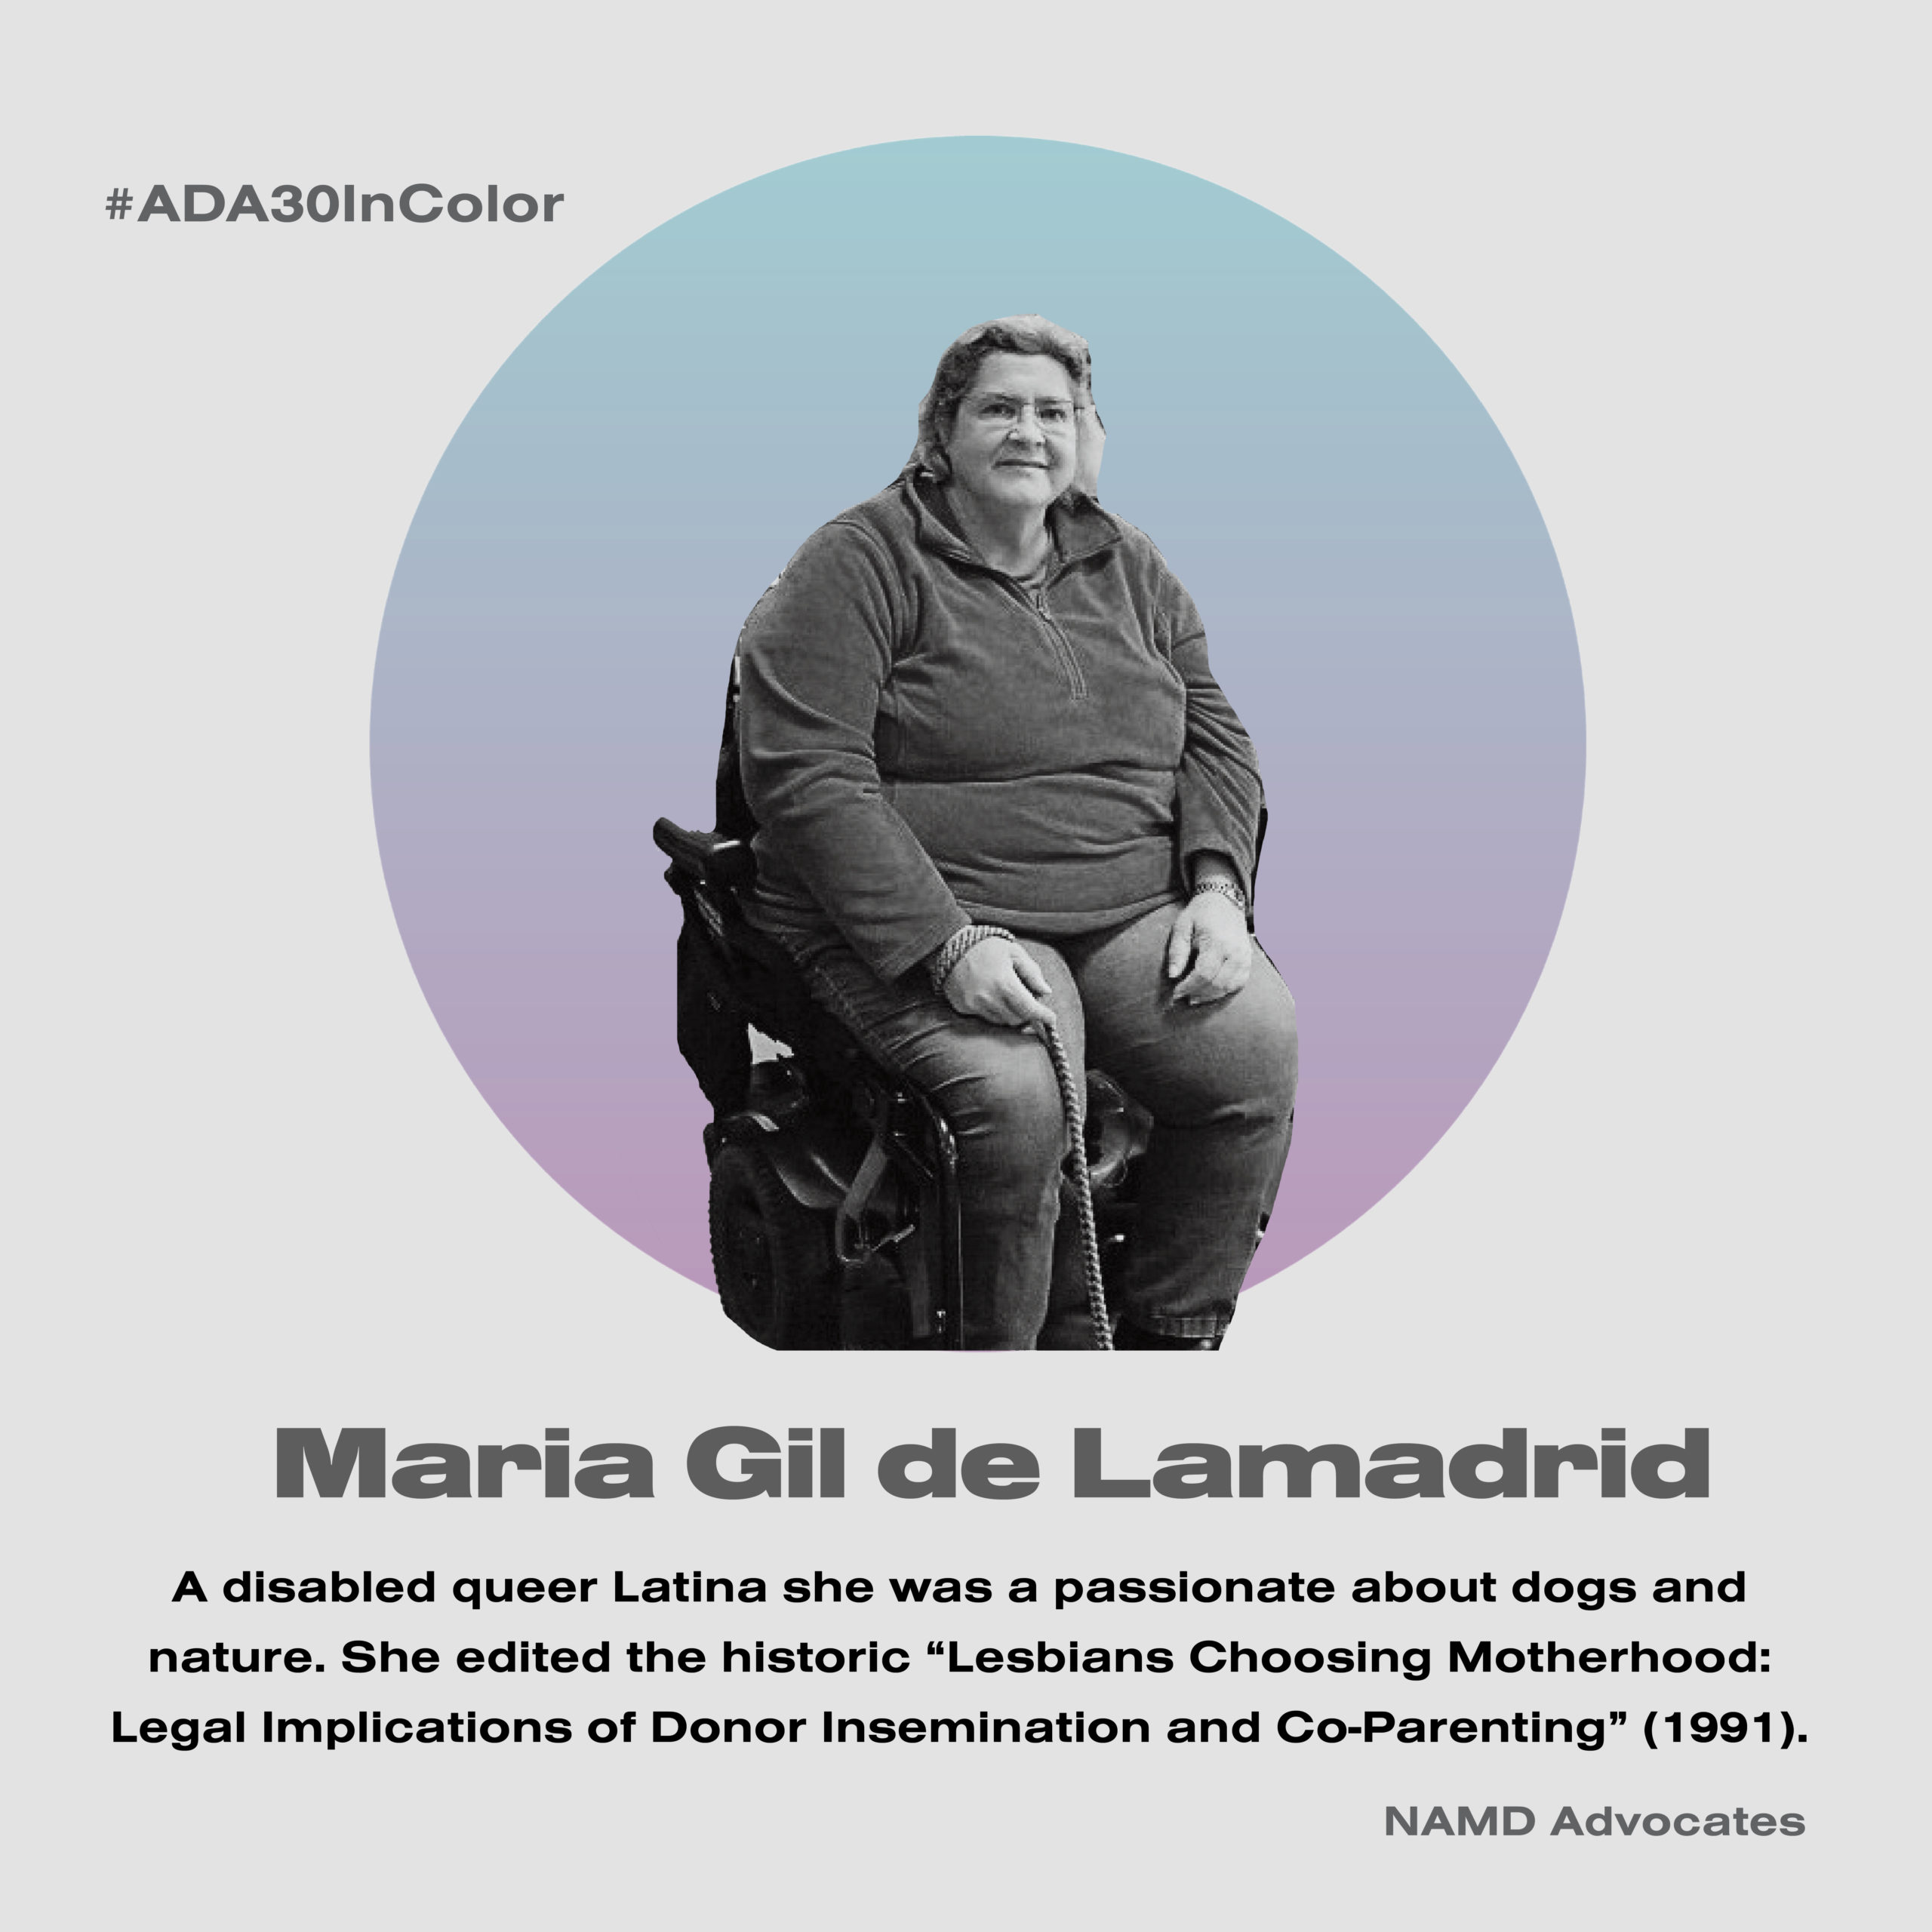 Maria Gil de Lamadrid. A disabled queer Latina she was passionate about dogs and nature. She edited the historic "Lesbians Choosing Motherhood: Legal Implications of Donor Insemination and CoParenting" (1991).